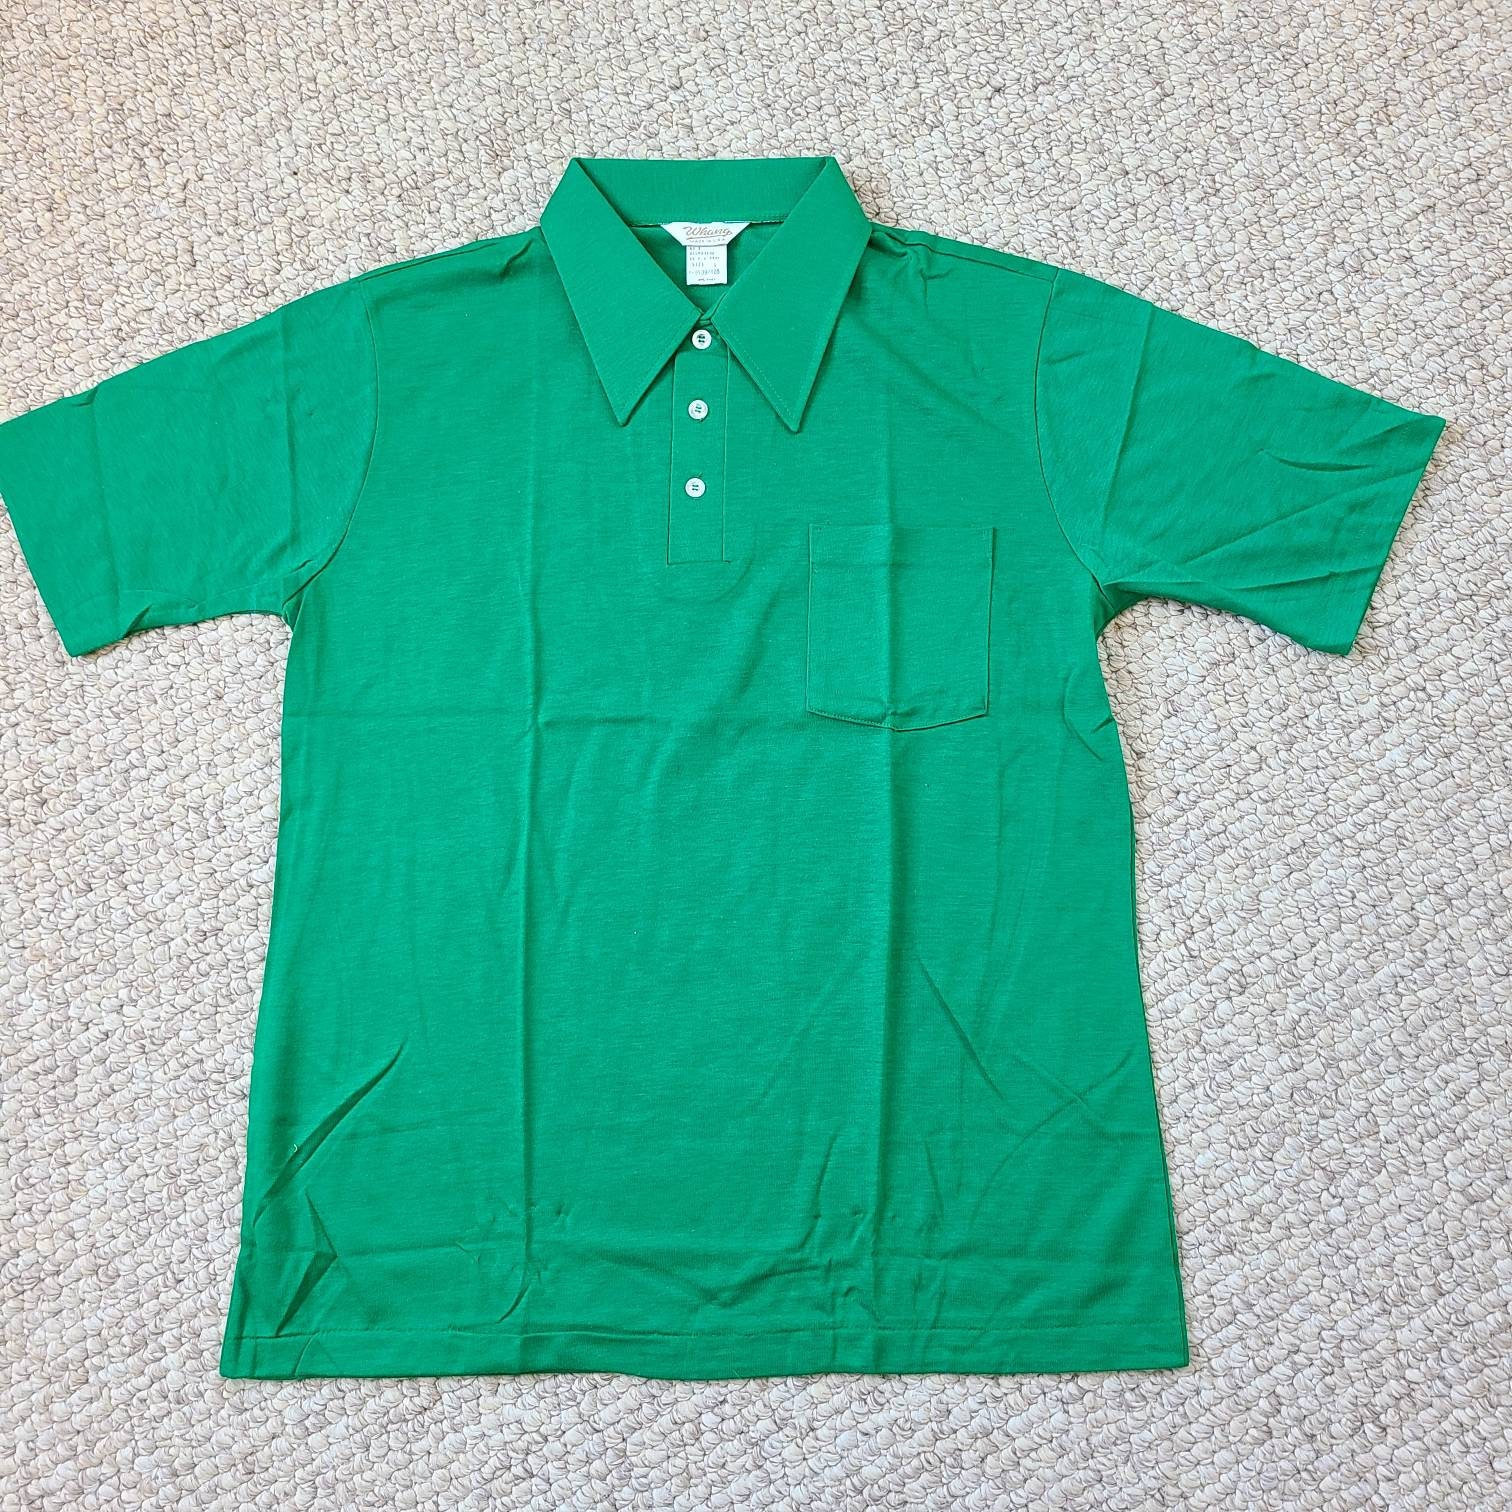 New Mens 60s Polo Shirts Large Various Colors New Old - Etsy